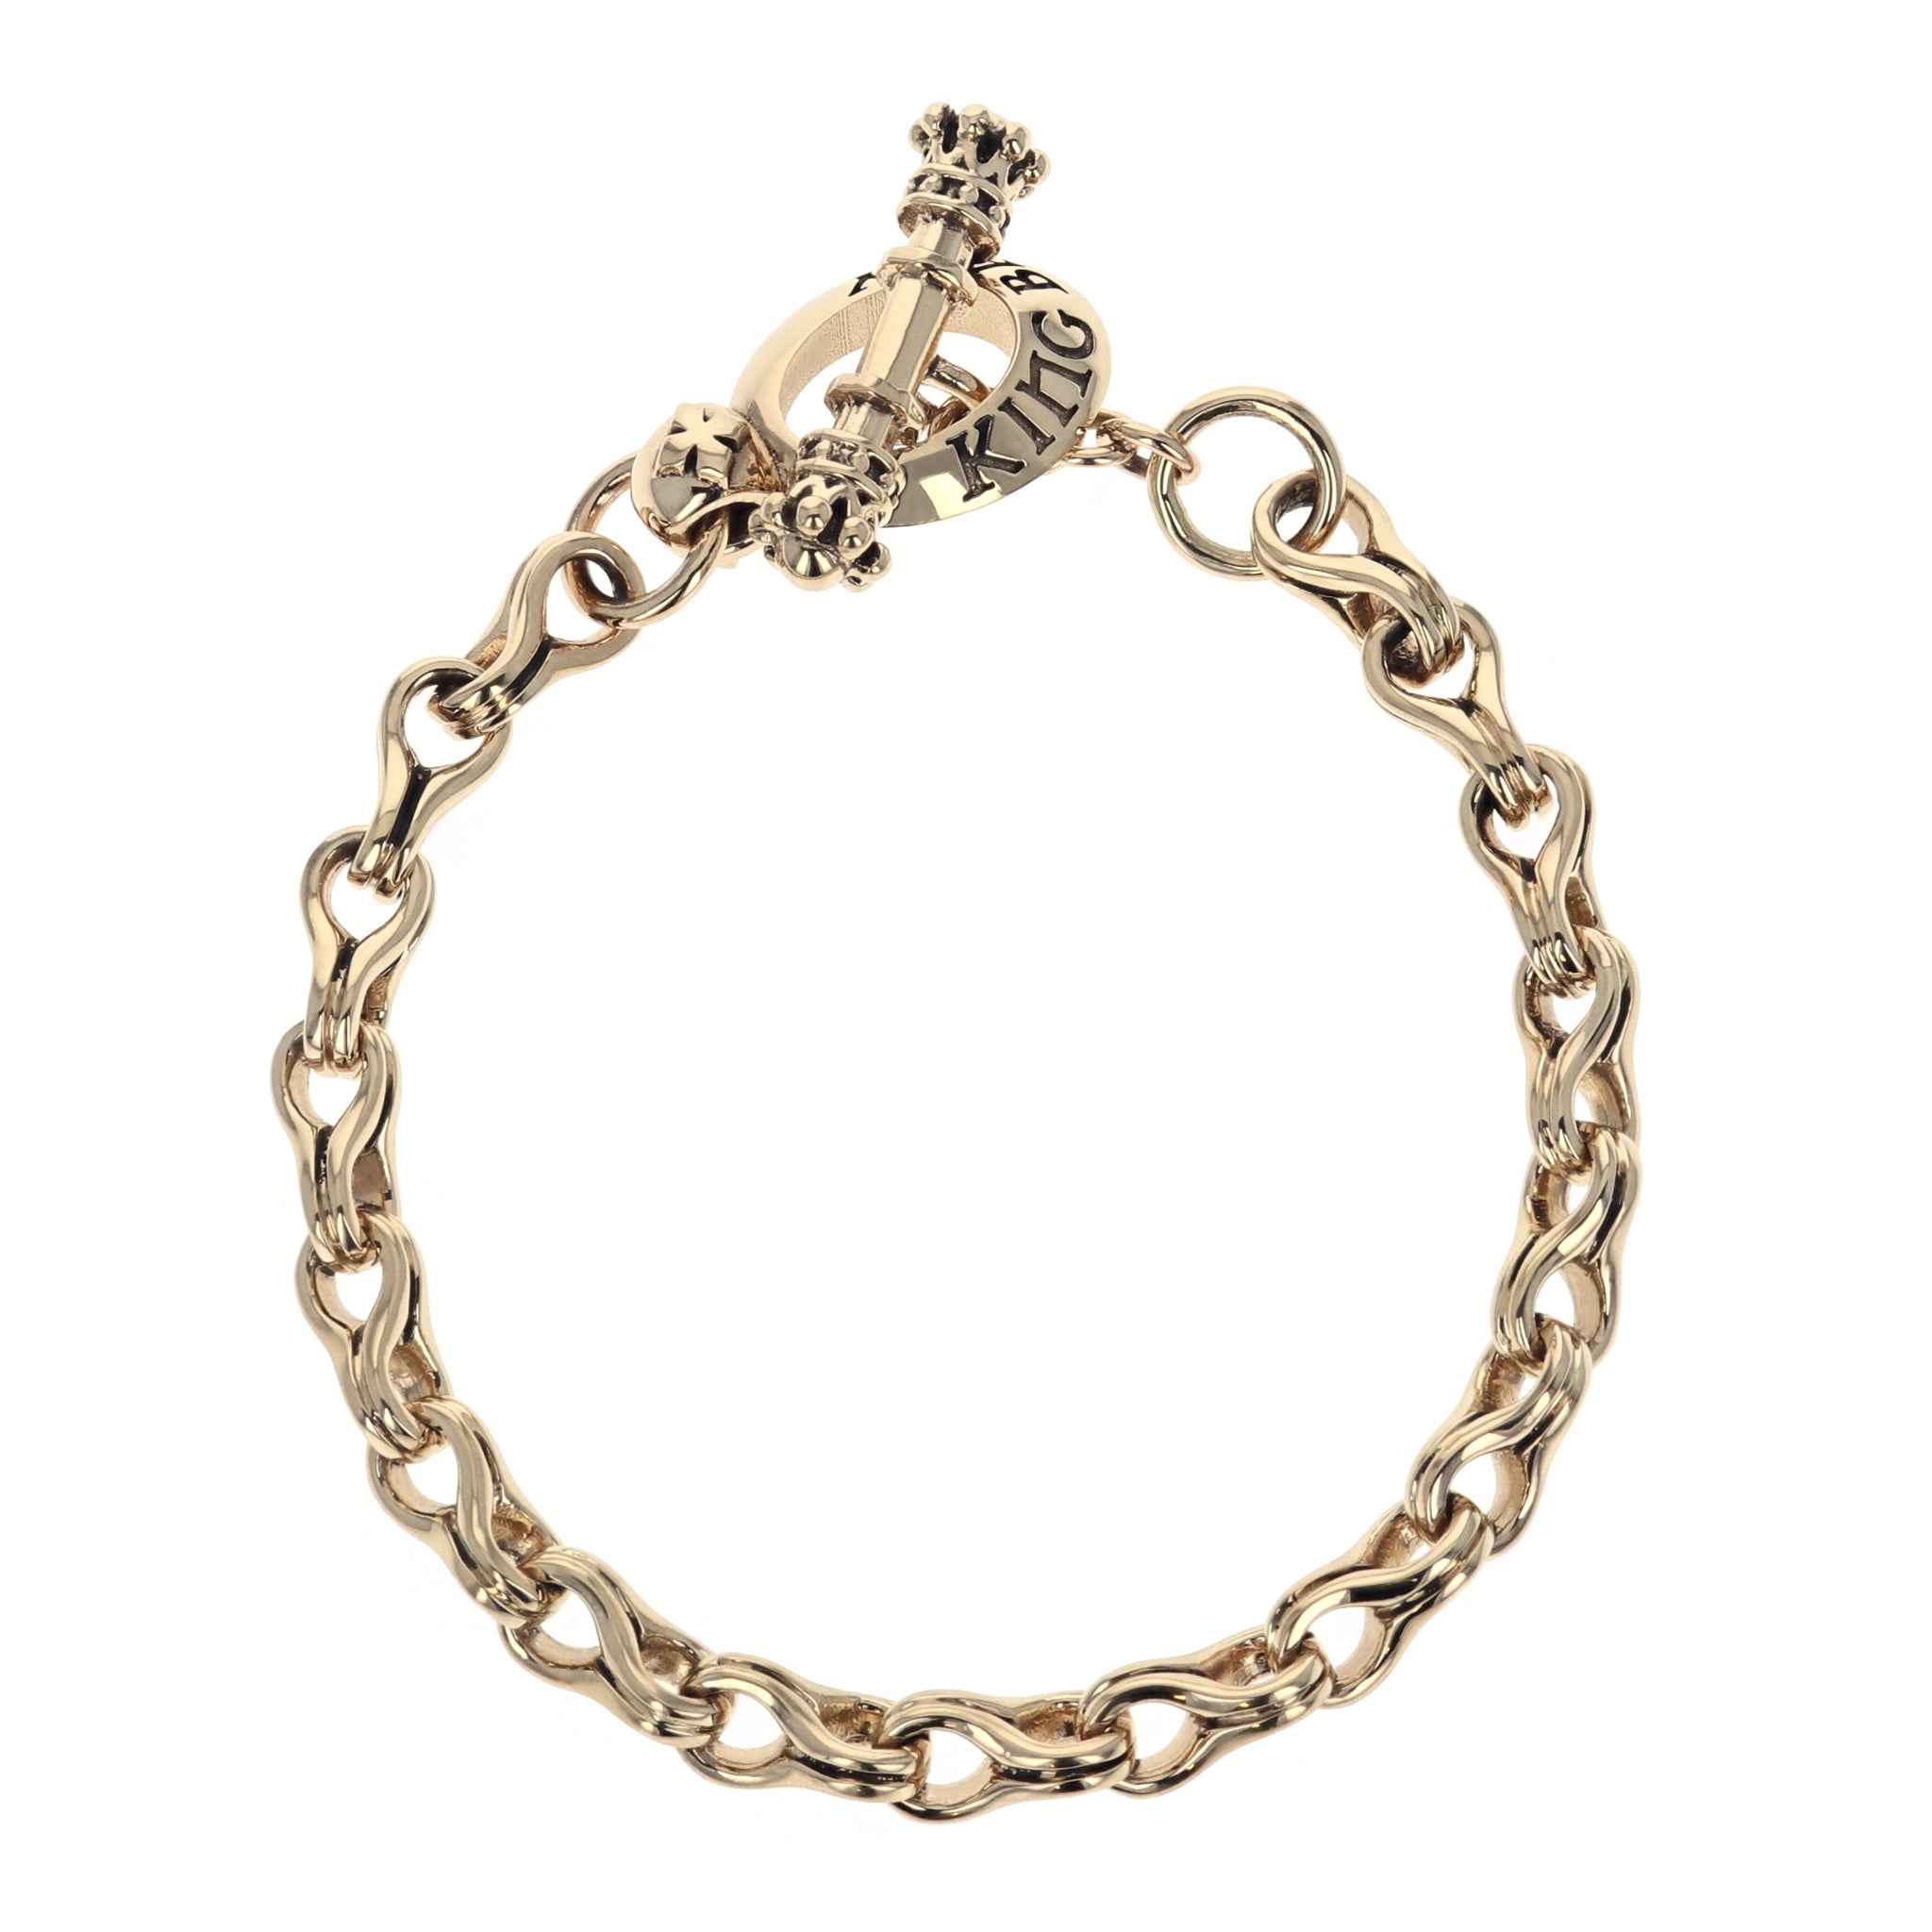 10K Yellow Gold Small Twisted Eight Link Bracelet